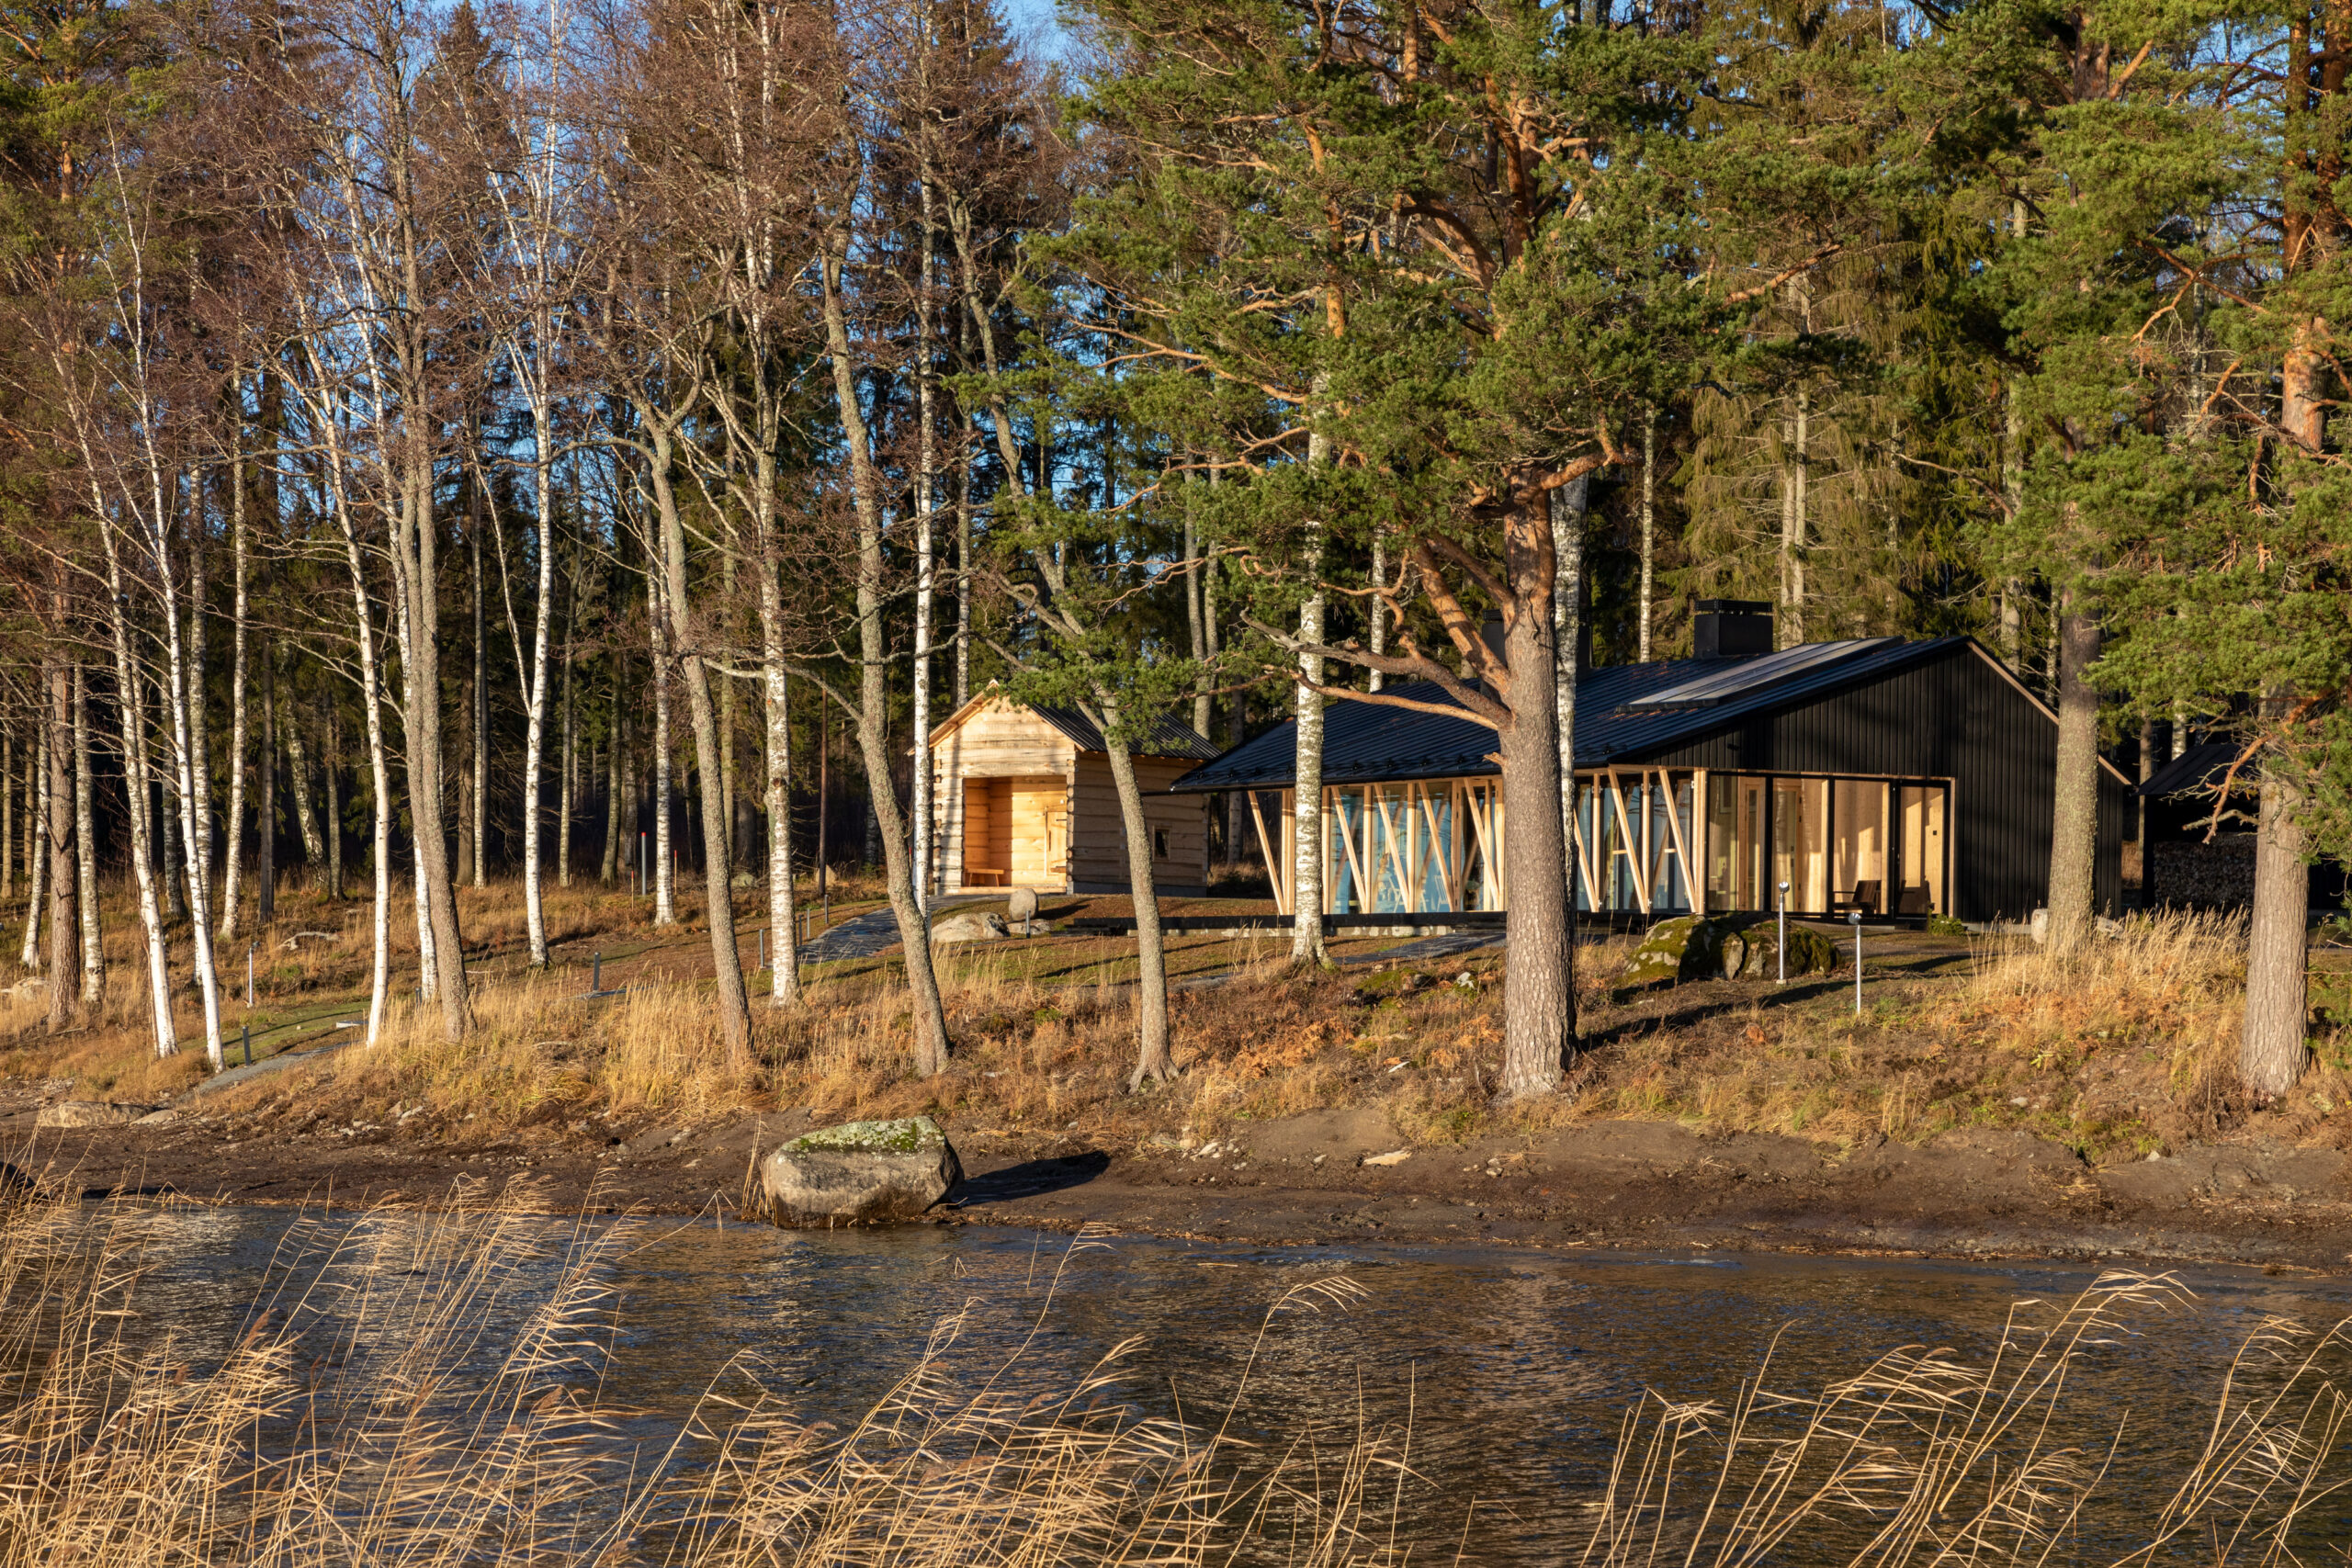 The two new sauna buildings by the lake, one is a smoke saune made of hand carved logs, the other is a larger sauna with a fireplace room and a terrace made of CLT